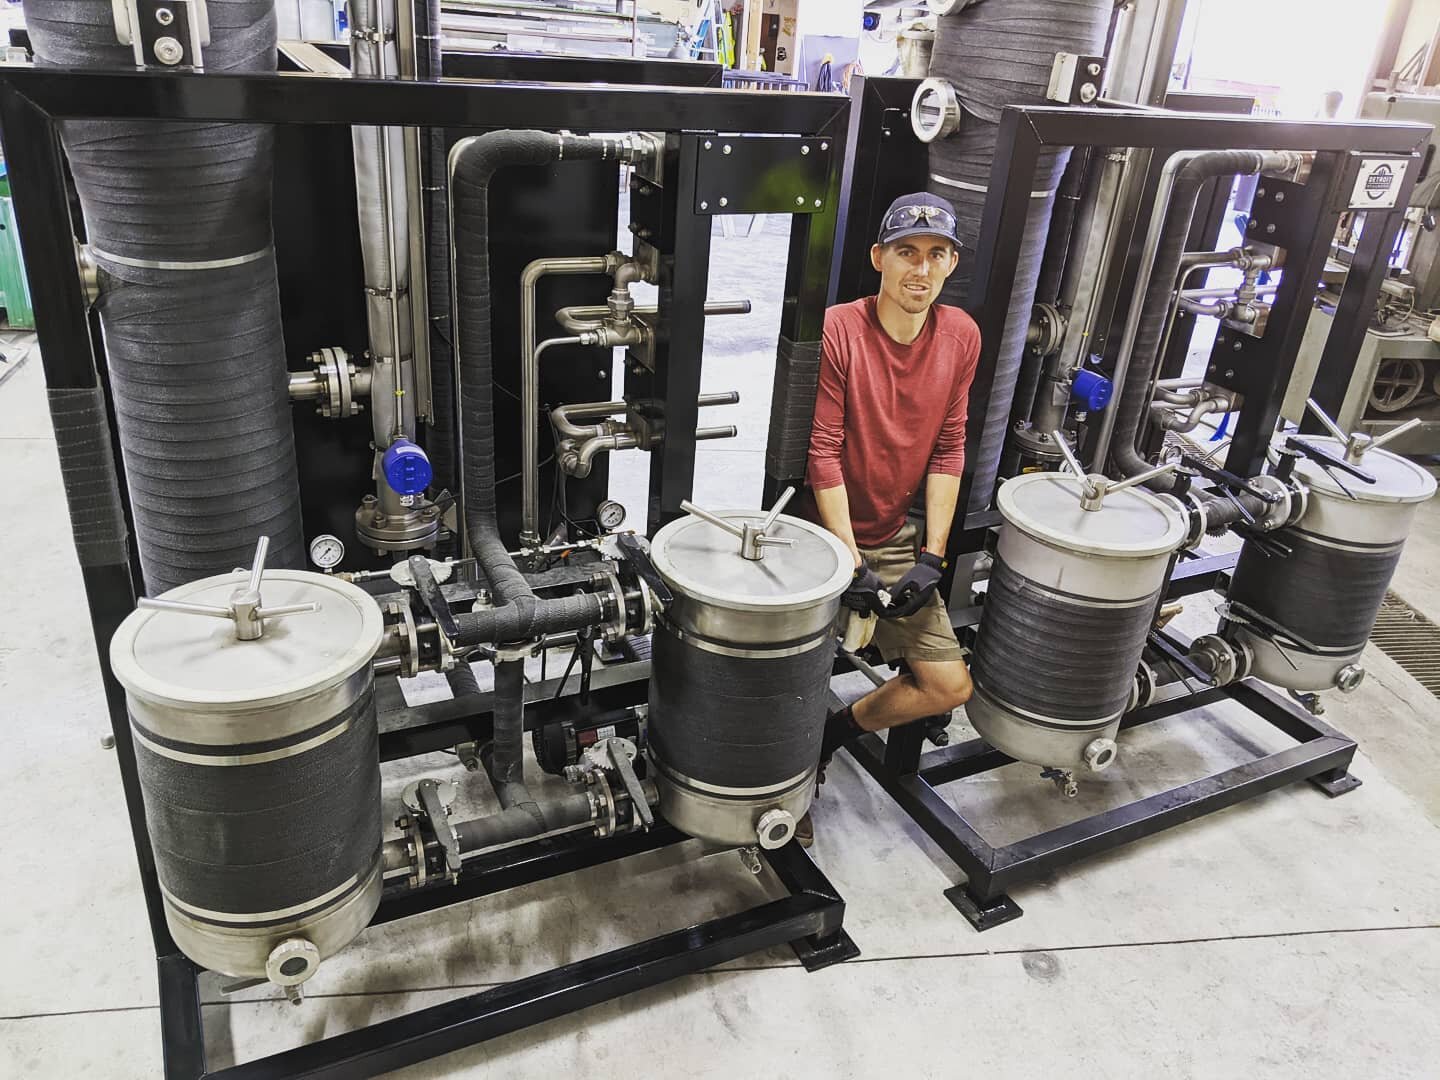 We build these machines to streamline production, maximize creativity, and free up time for the rest of your business.
.
.
.
.
#distilling #distillery #adi #americandistillinginstitute #craftspirits #craftdistilling #fabrication #manufacturing #gin #